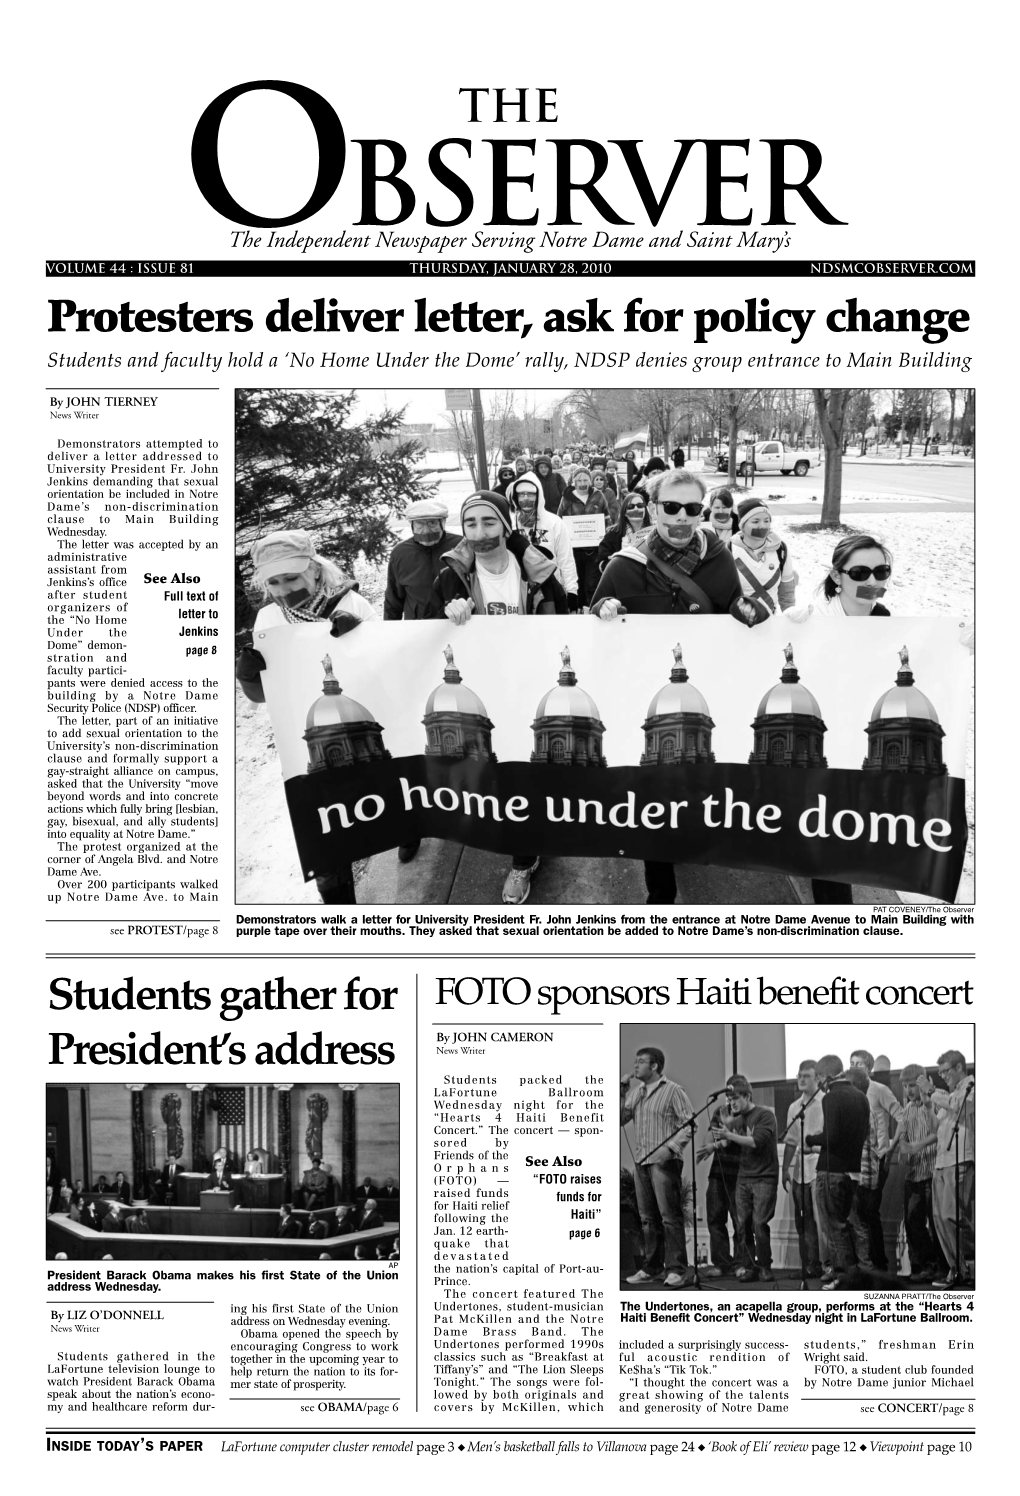 Protesters Deliver Letter, Ask for Policy Change Students Gather for President's Address